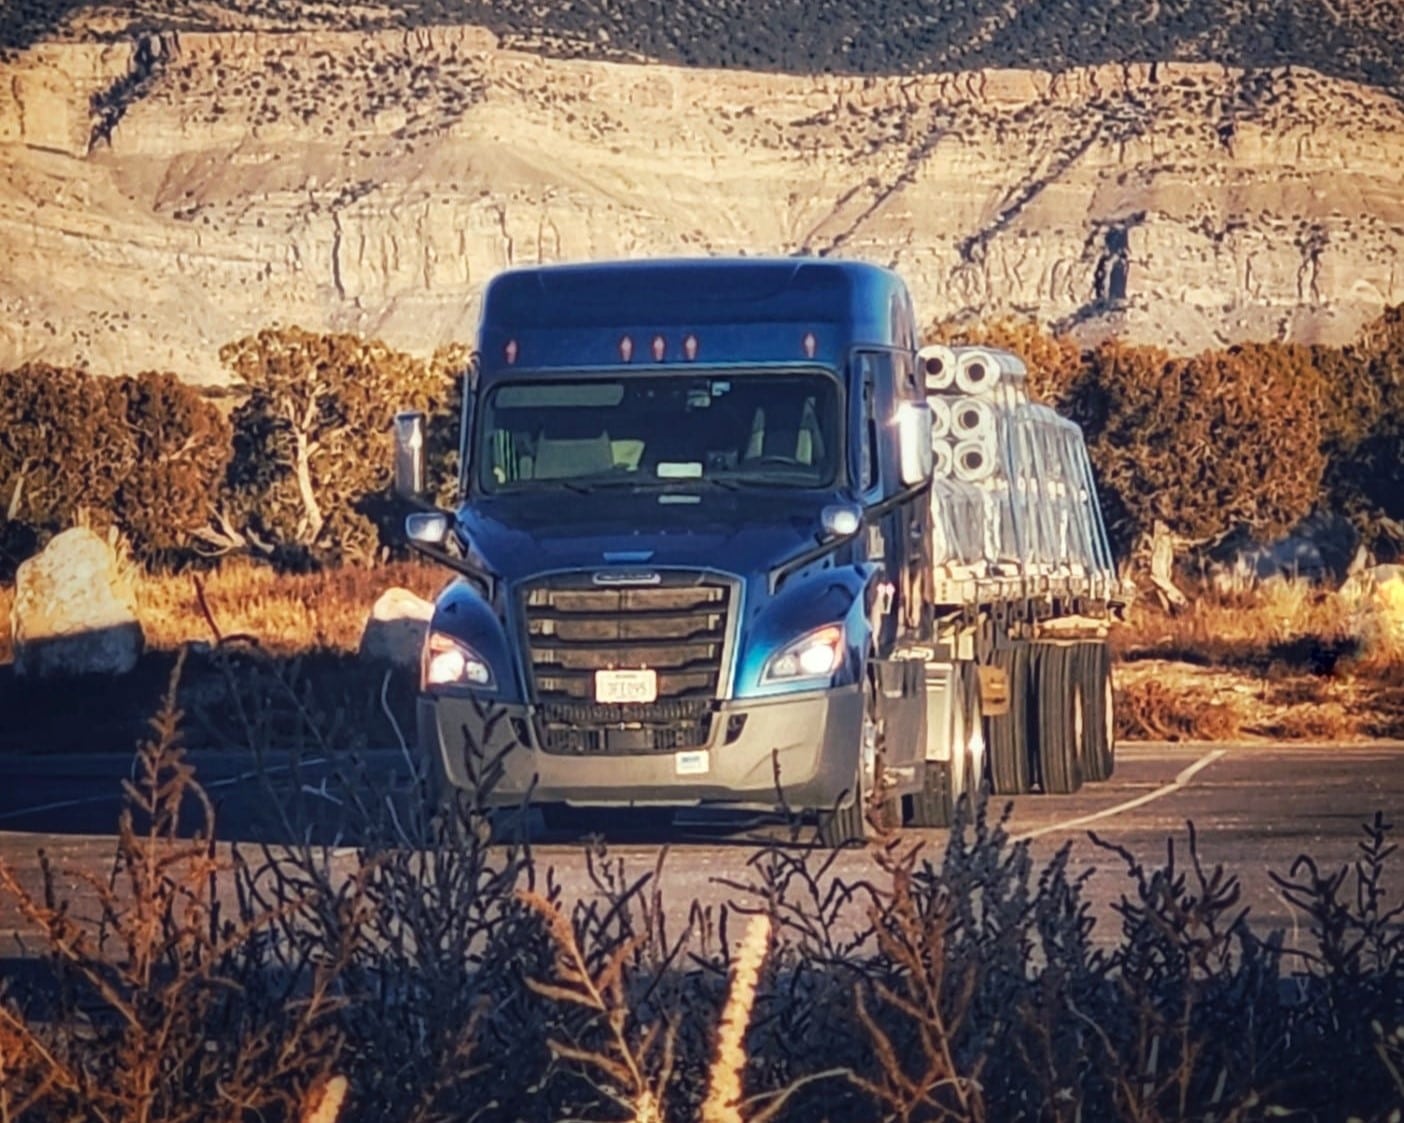 Melton truck parked with mountains behind it